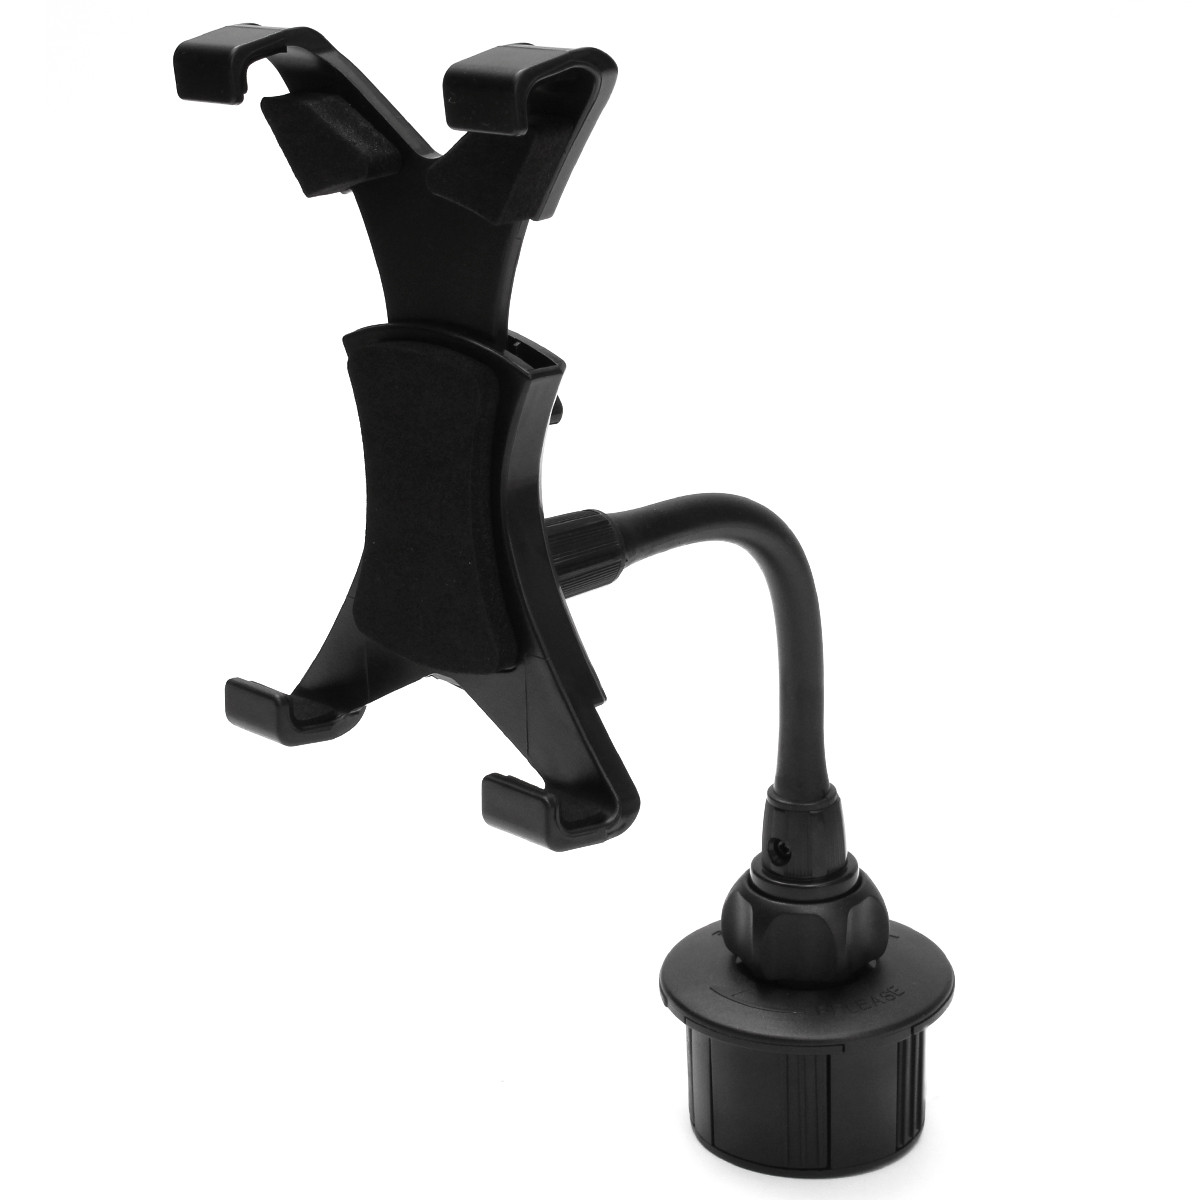 Adjustable-Bendy-Car-Cup-Holder-Mount-for-7-Inch-to-10-Inch-Tablet-1115144-3